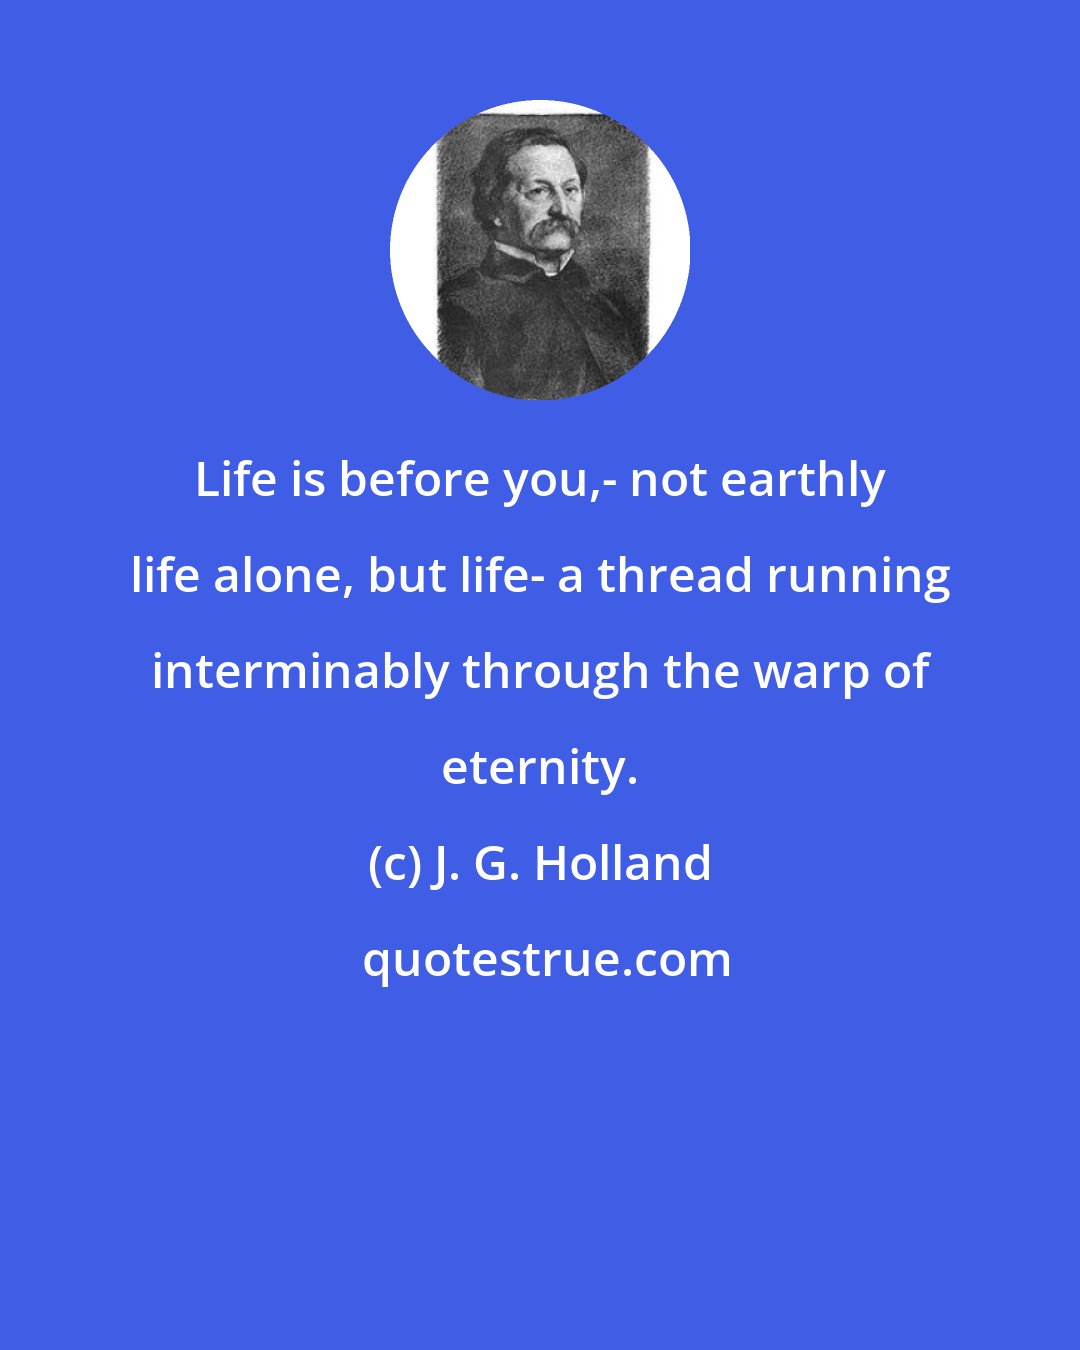 J. G. Holland: Life is before you,- not earthly life alone, but life- a thread running interminably through the warp of eternity.